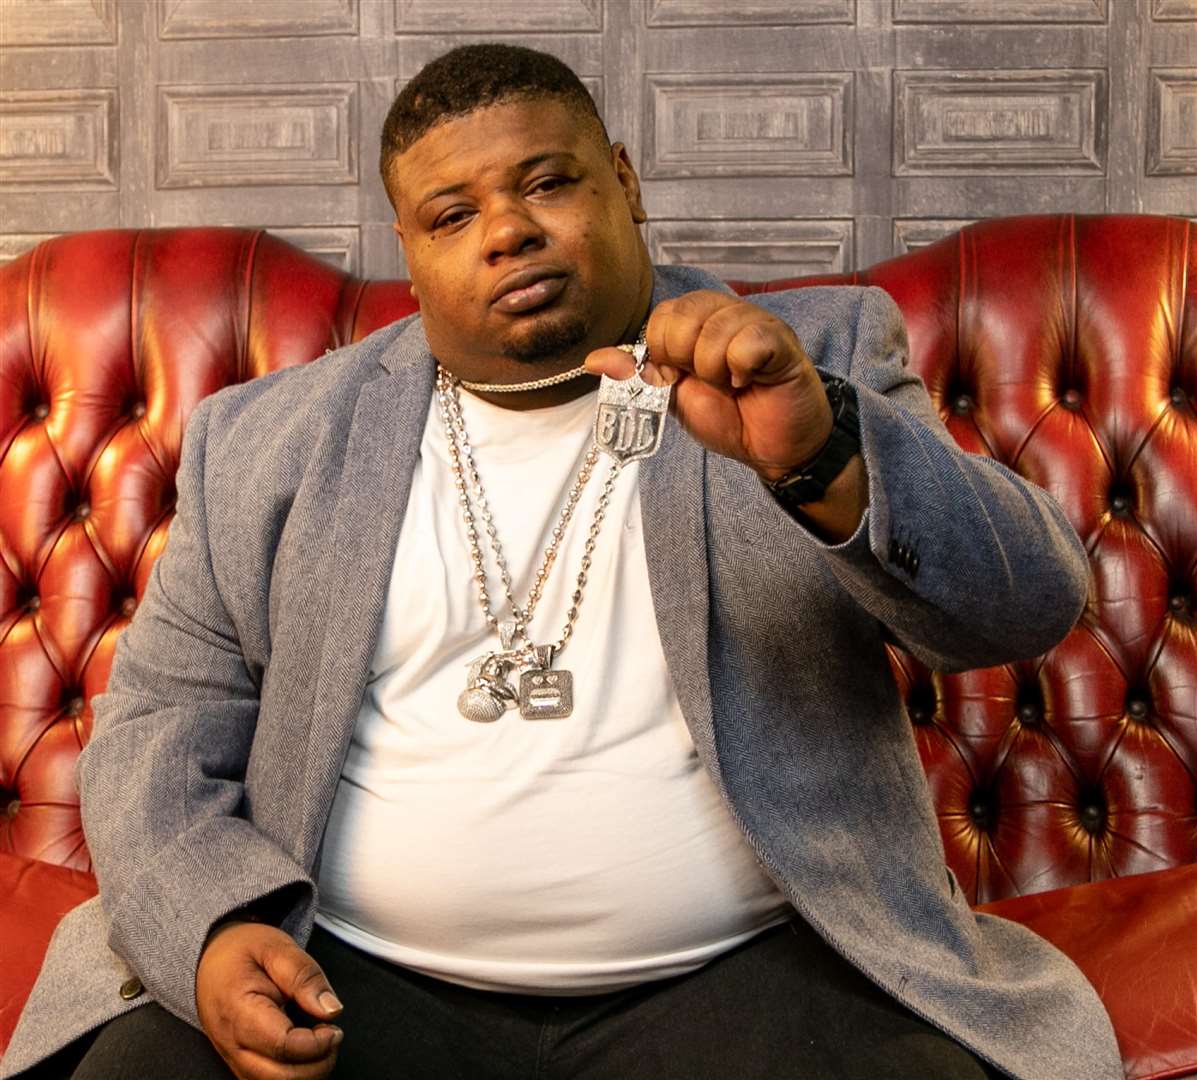 Big Narstie will be at Dreamland's Block Party